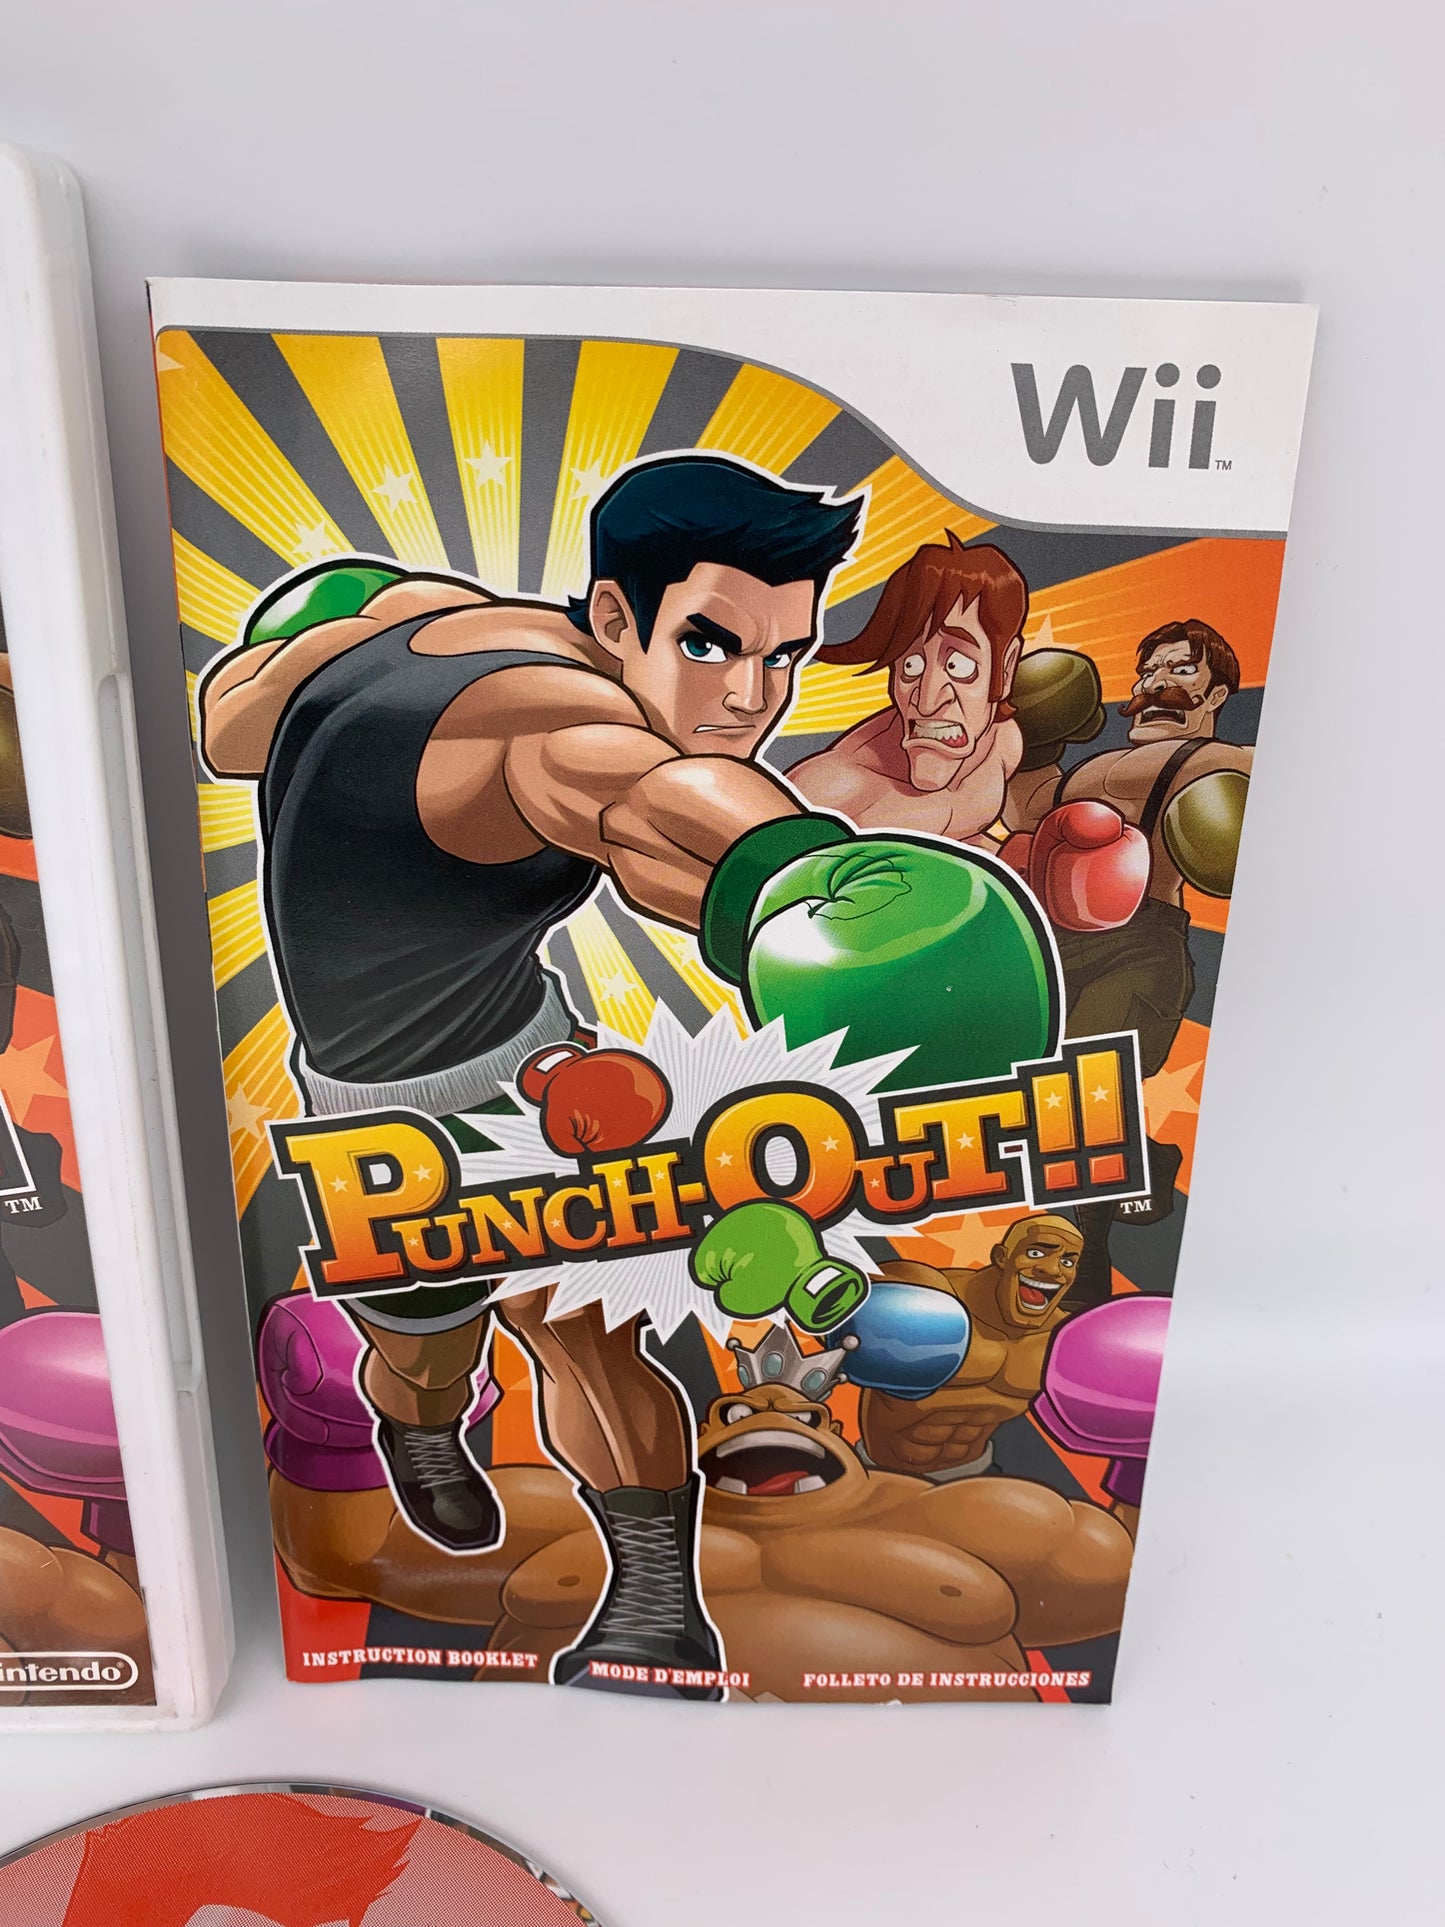 NiNTENDO Wii | PUNCH-OUT